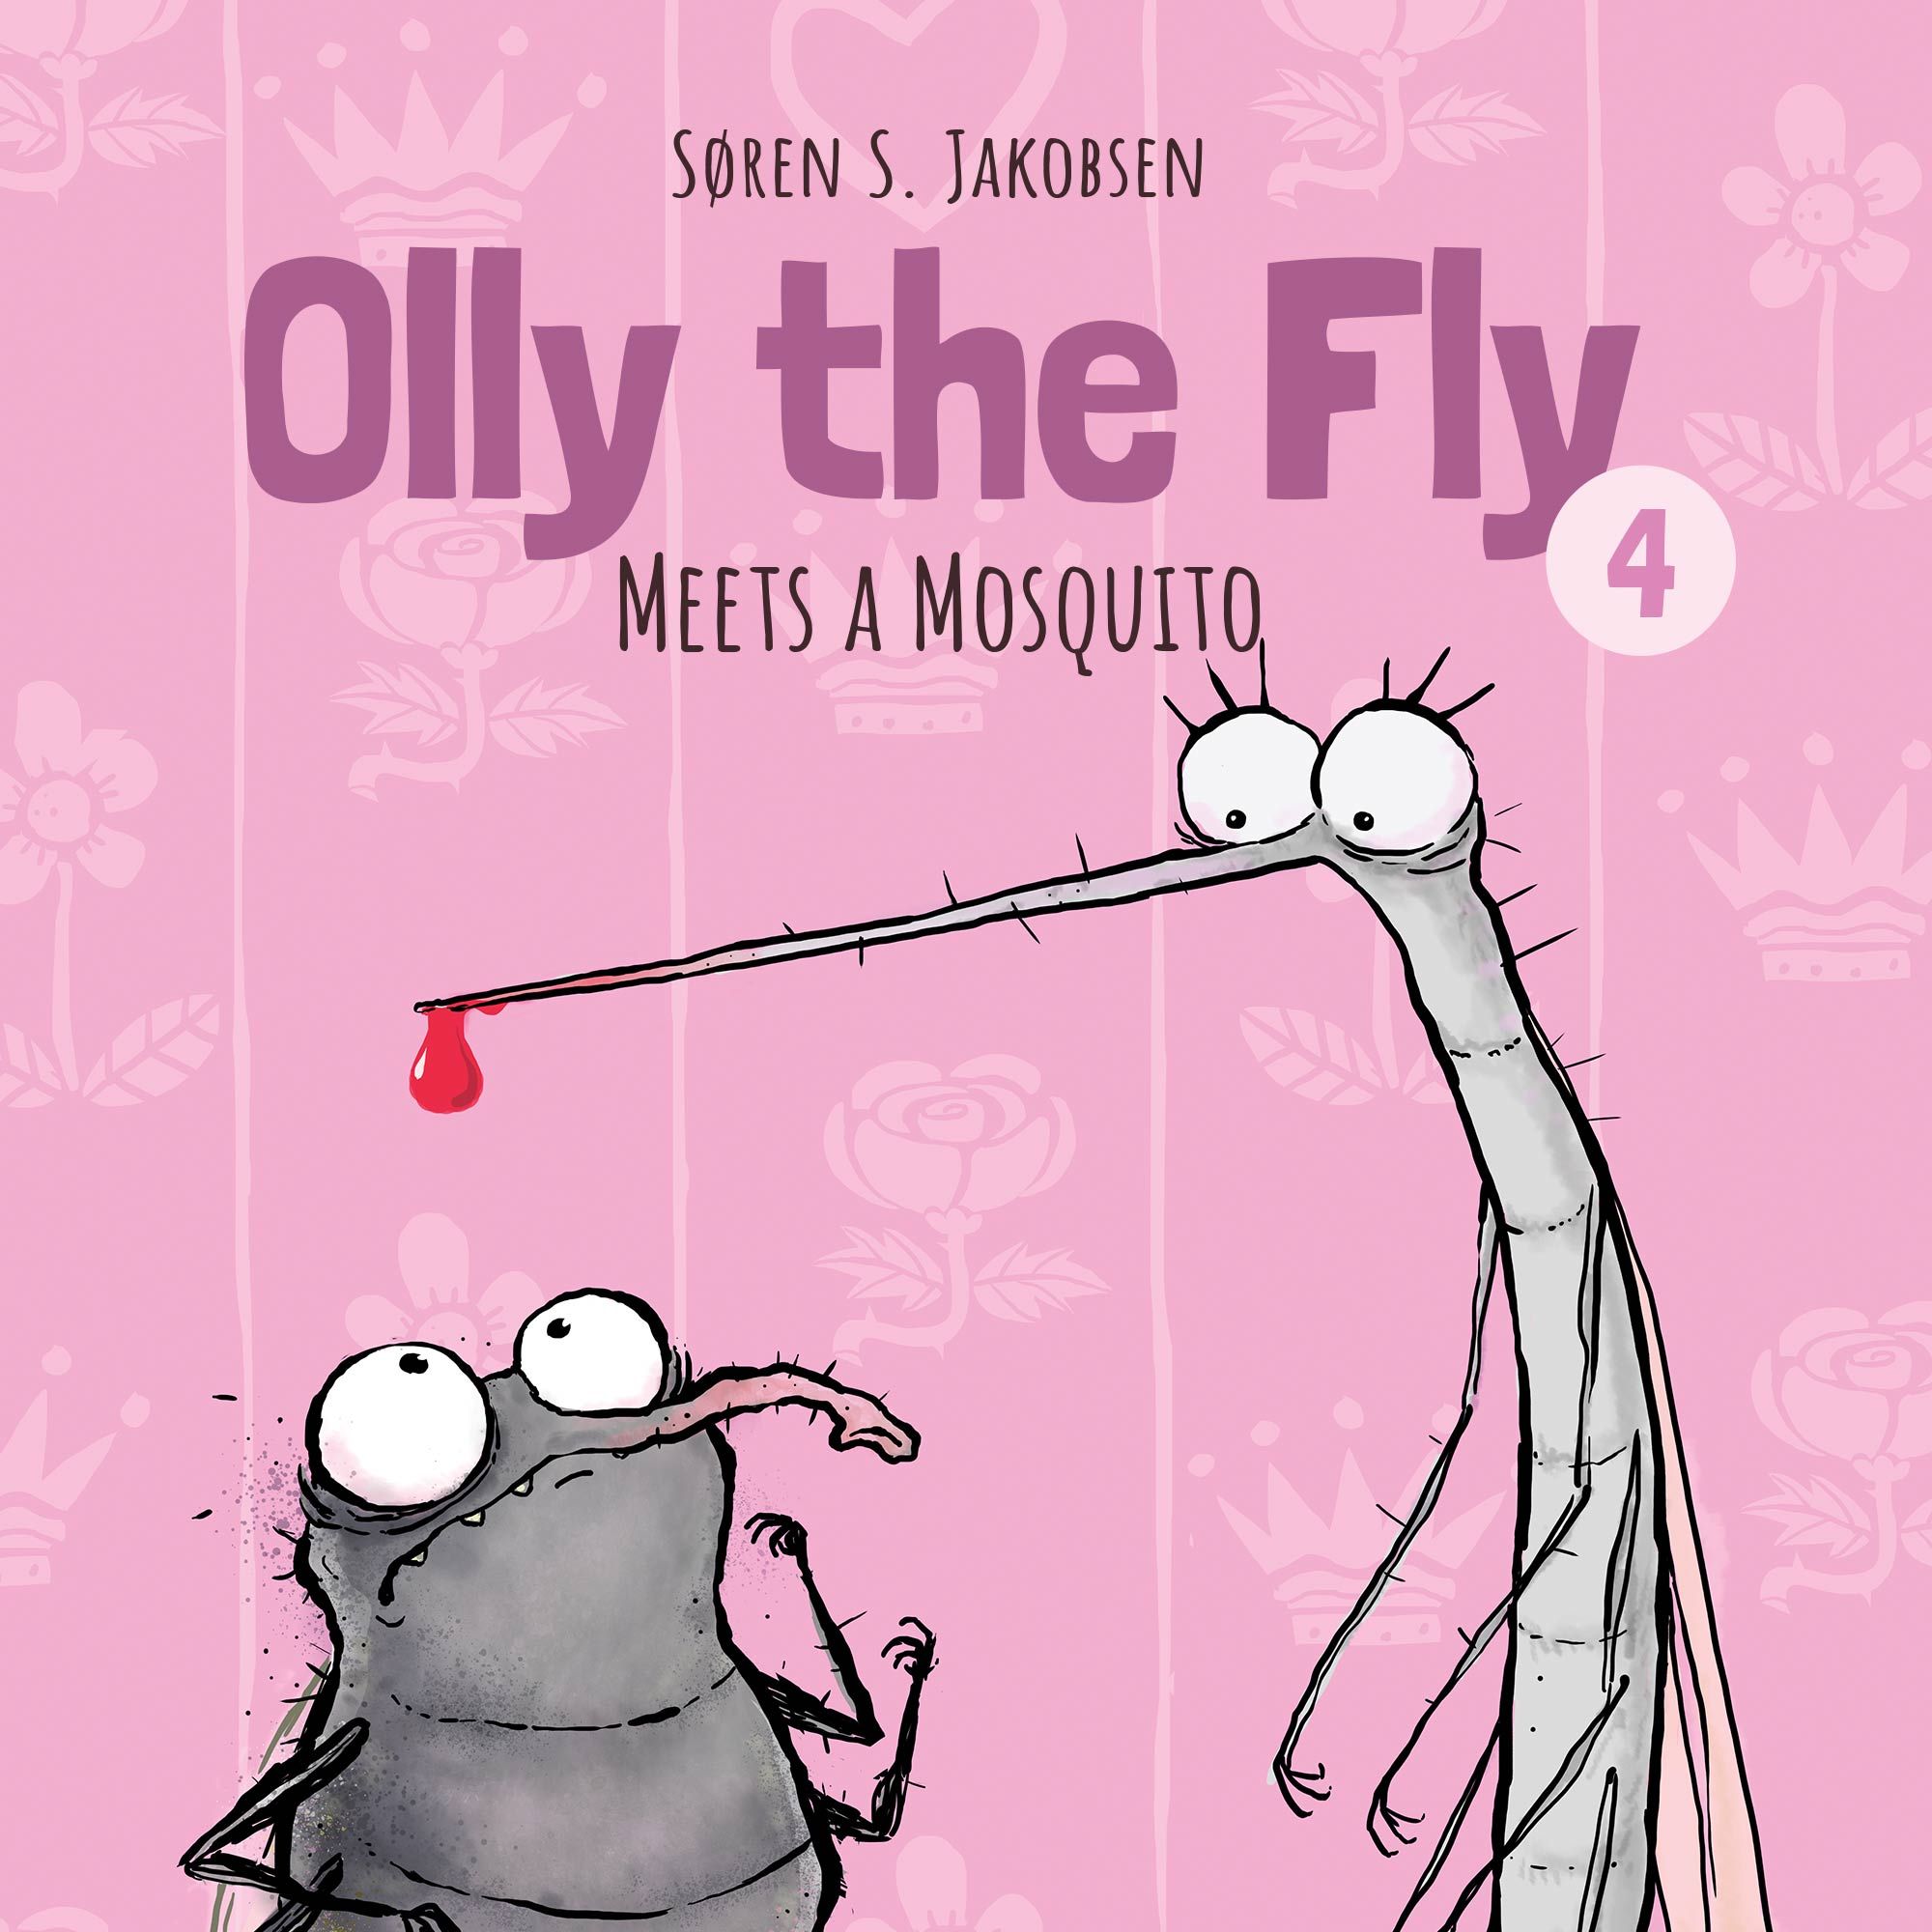 Olly the Fly #4: Olly the Fly Meets a Mosquito, audiobook by Søren S. Jakobsen